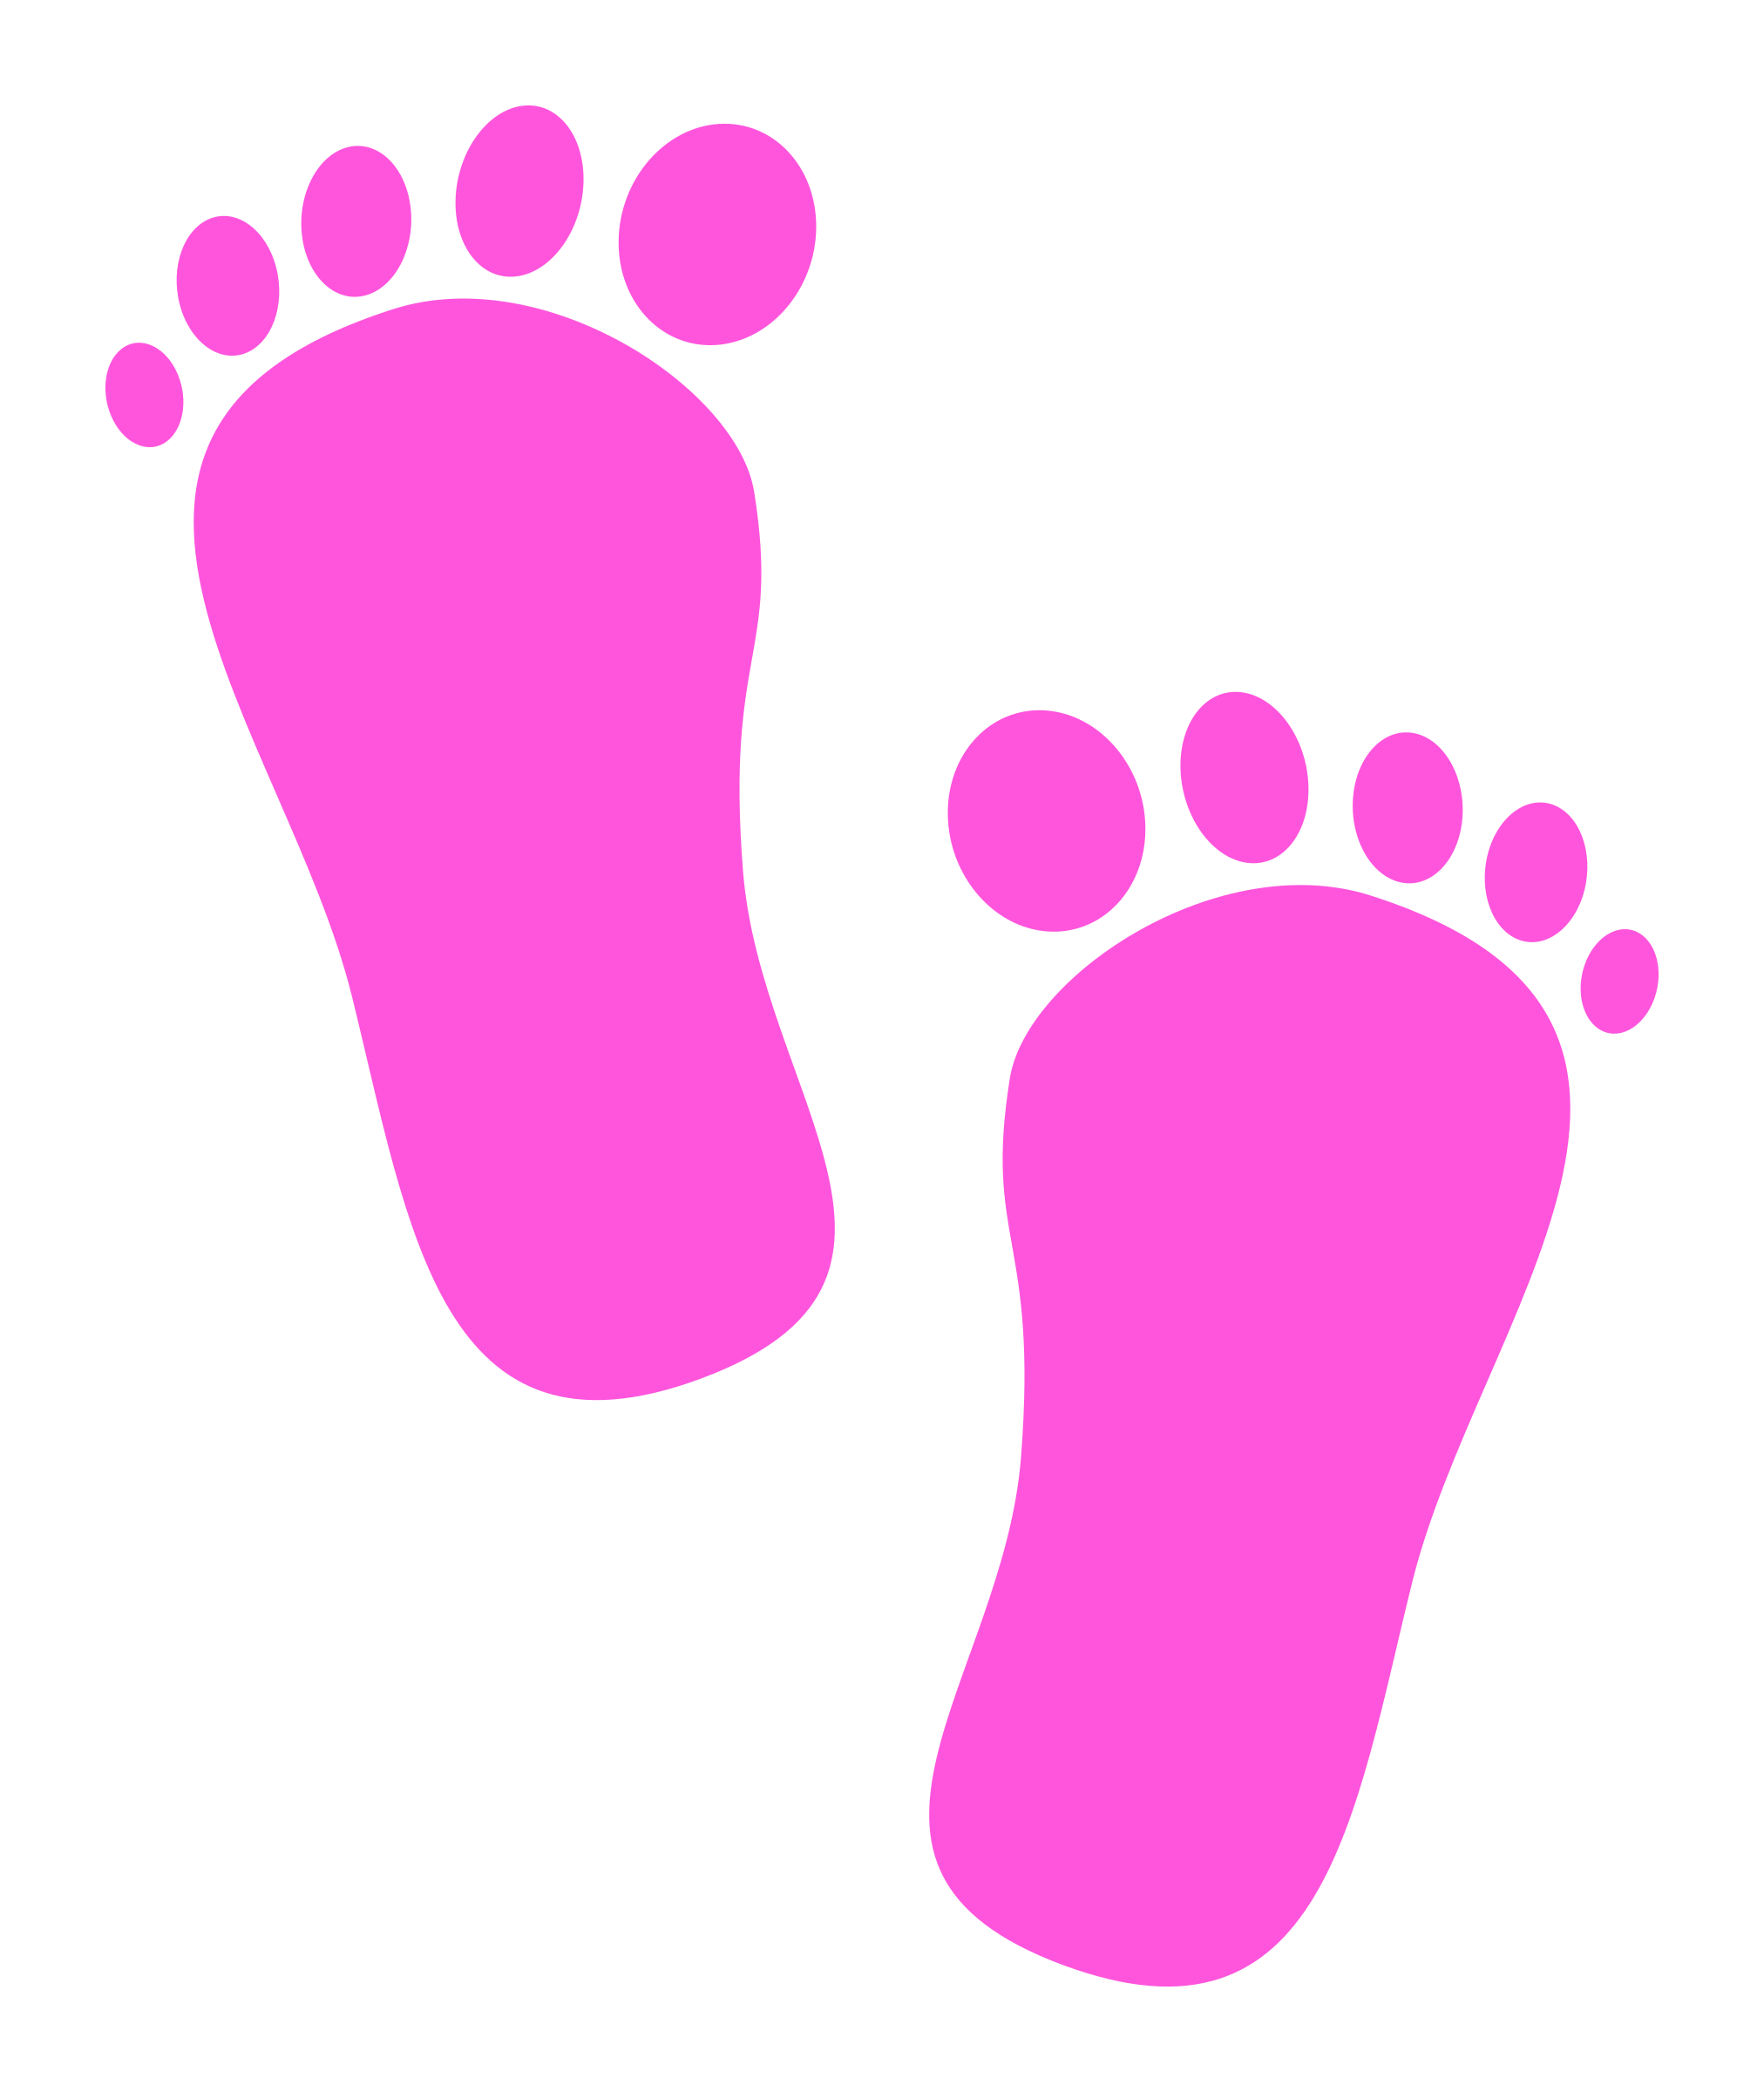 Baby footprints big image. Footsteps clipart animated